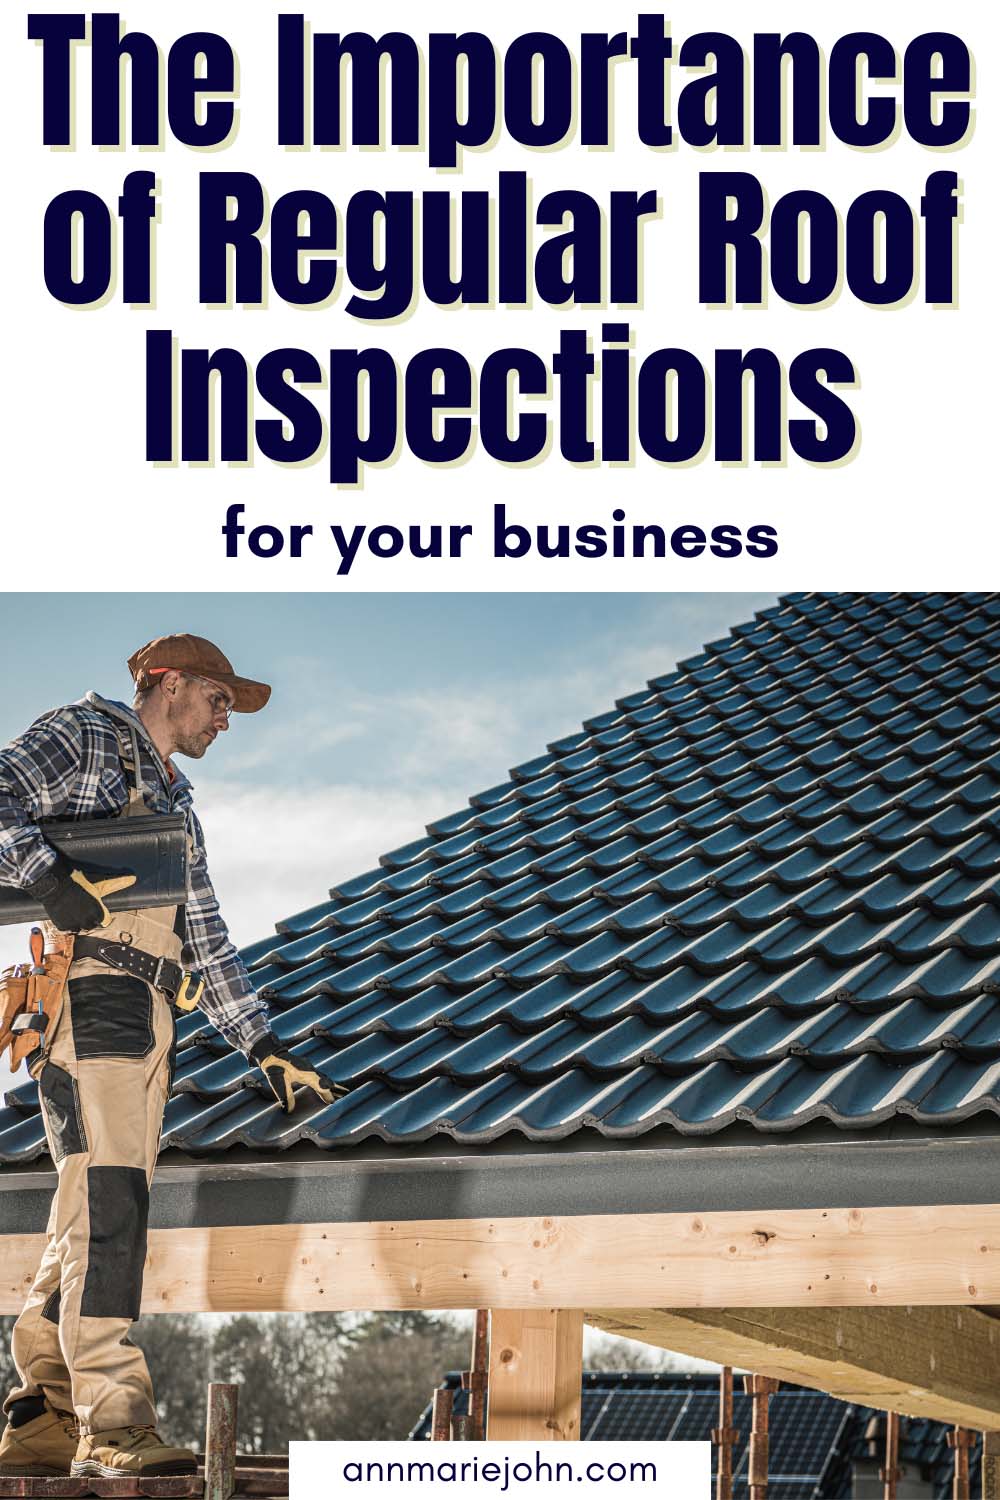 The Importance of Regular Roof Inspections for Your Business